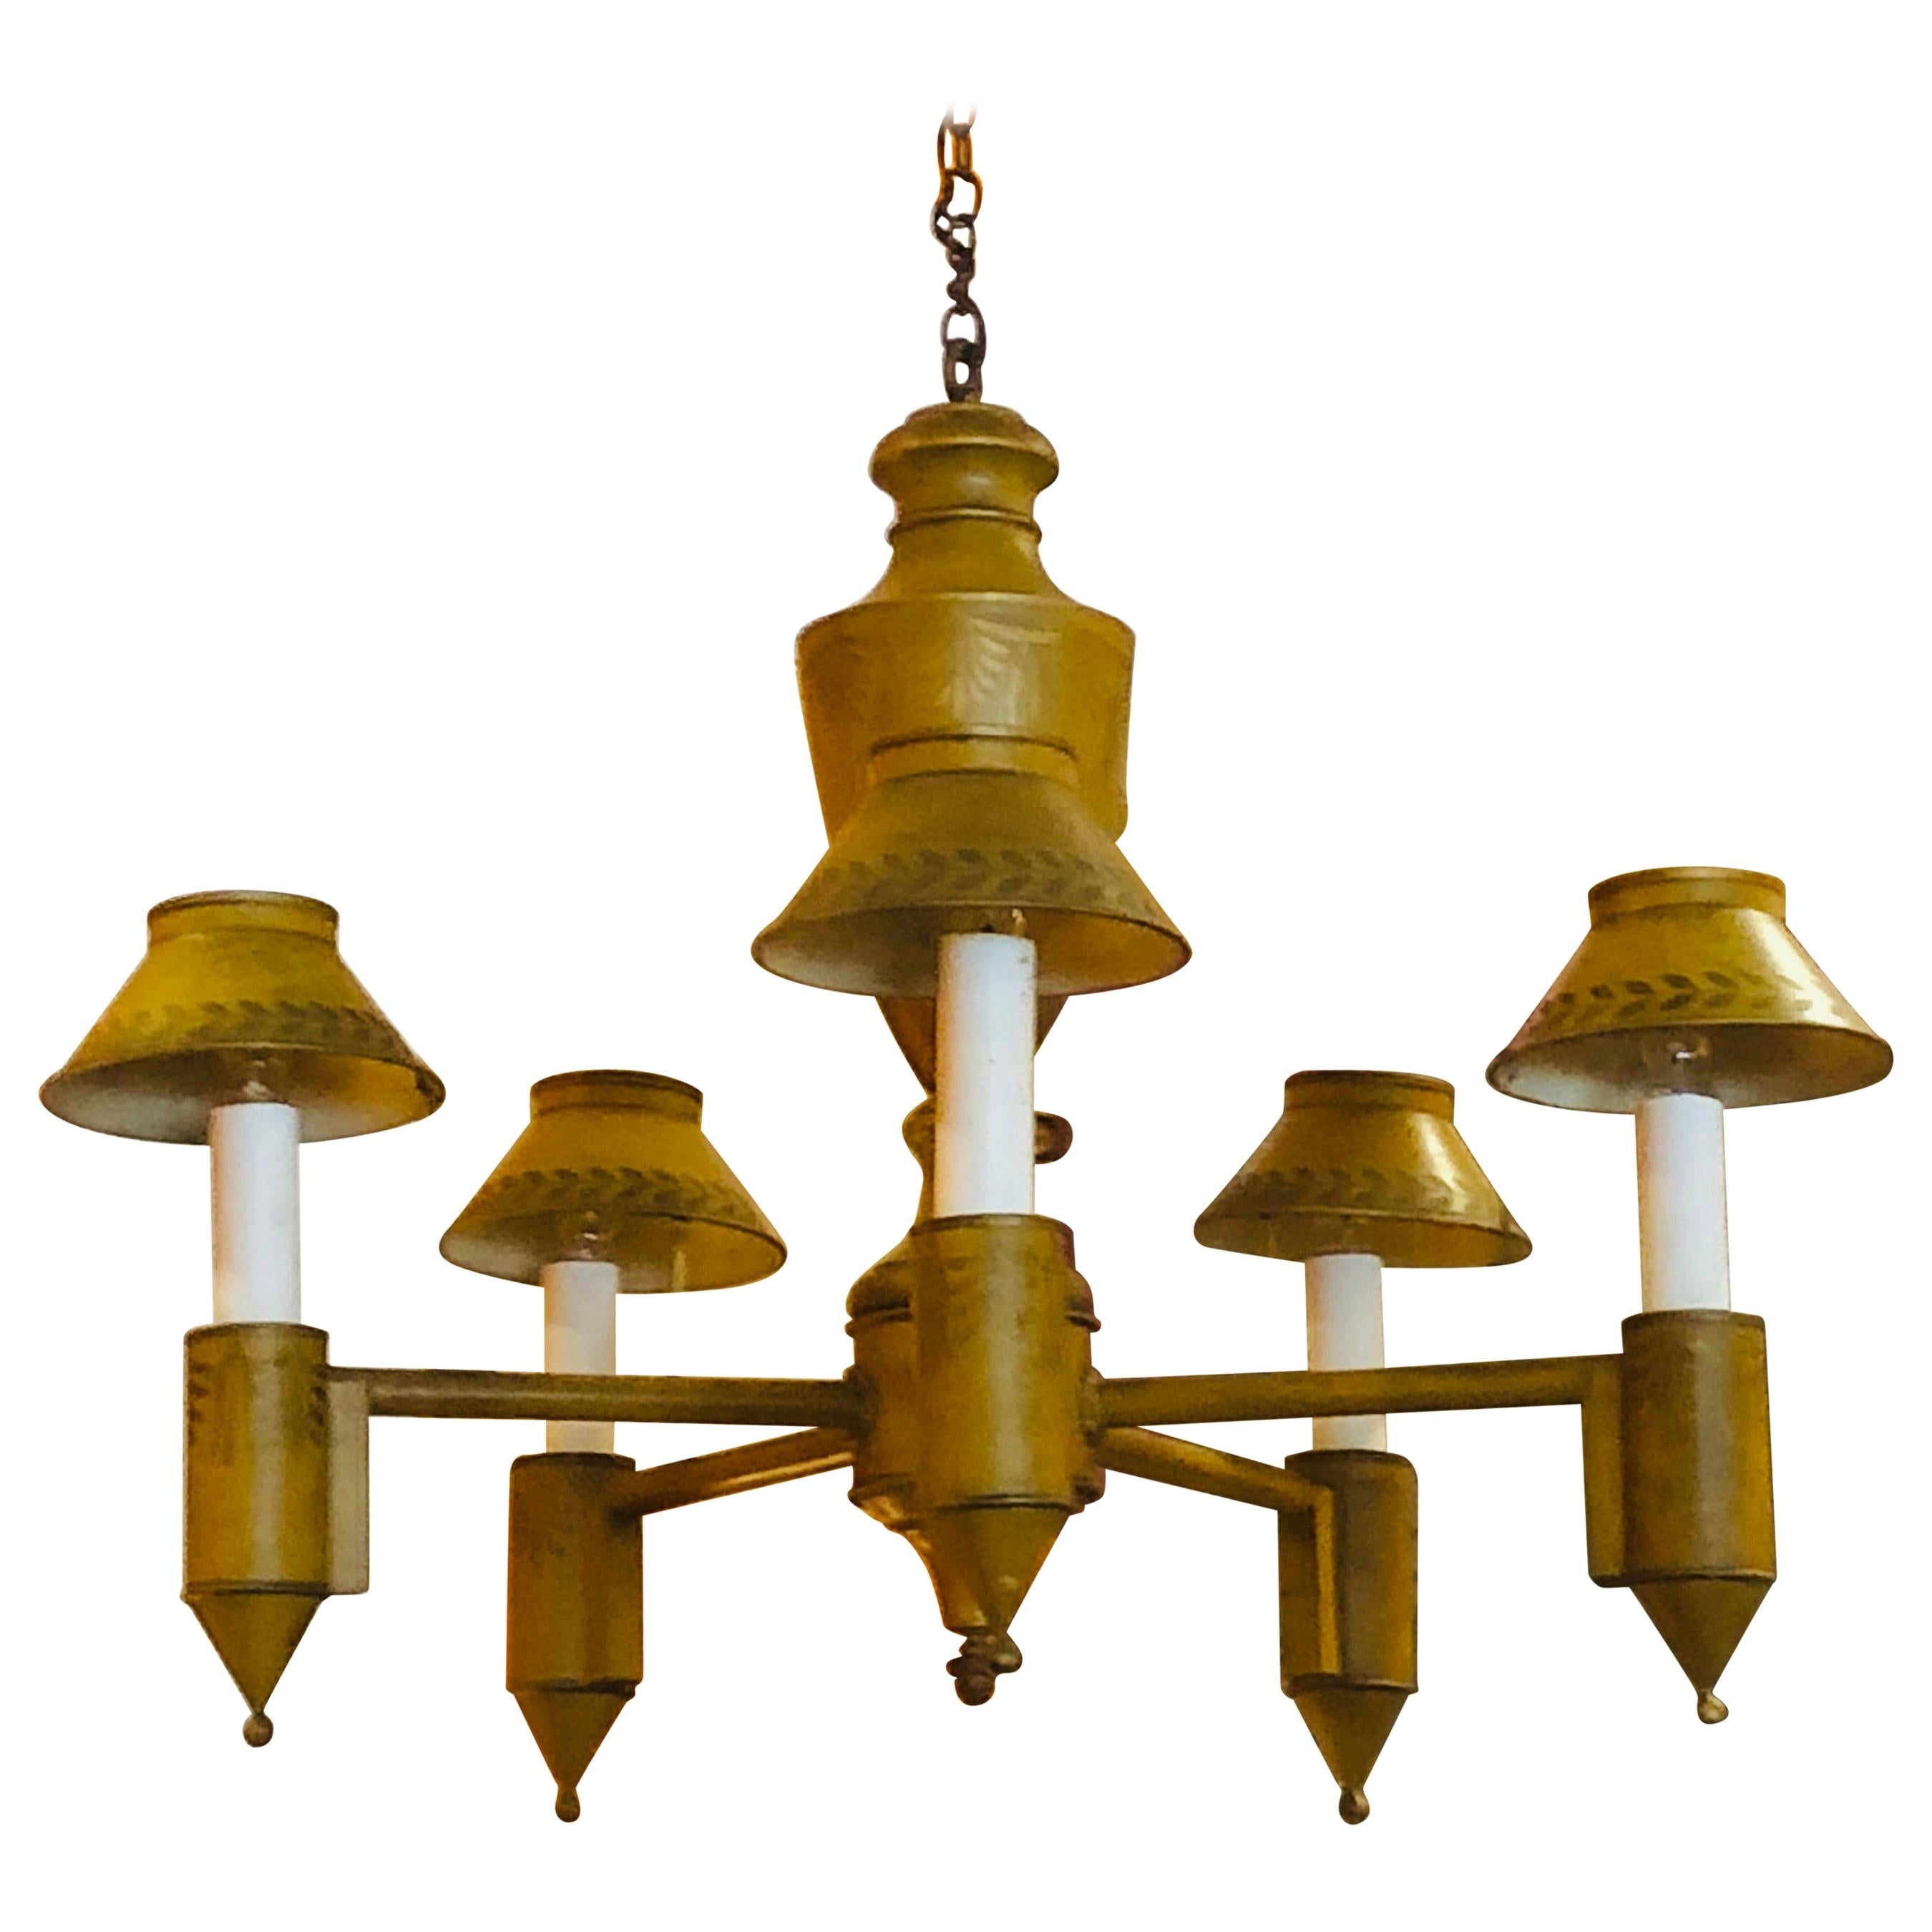 Tole Chandelier with Original Mustard and Hand Stenciled Paint, 20th Century